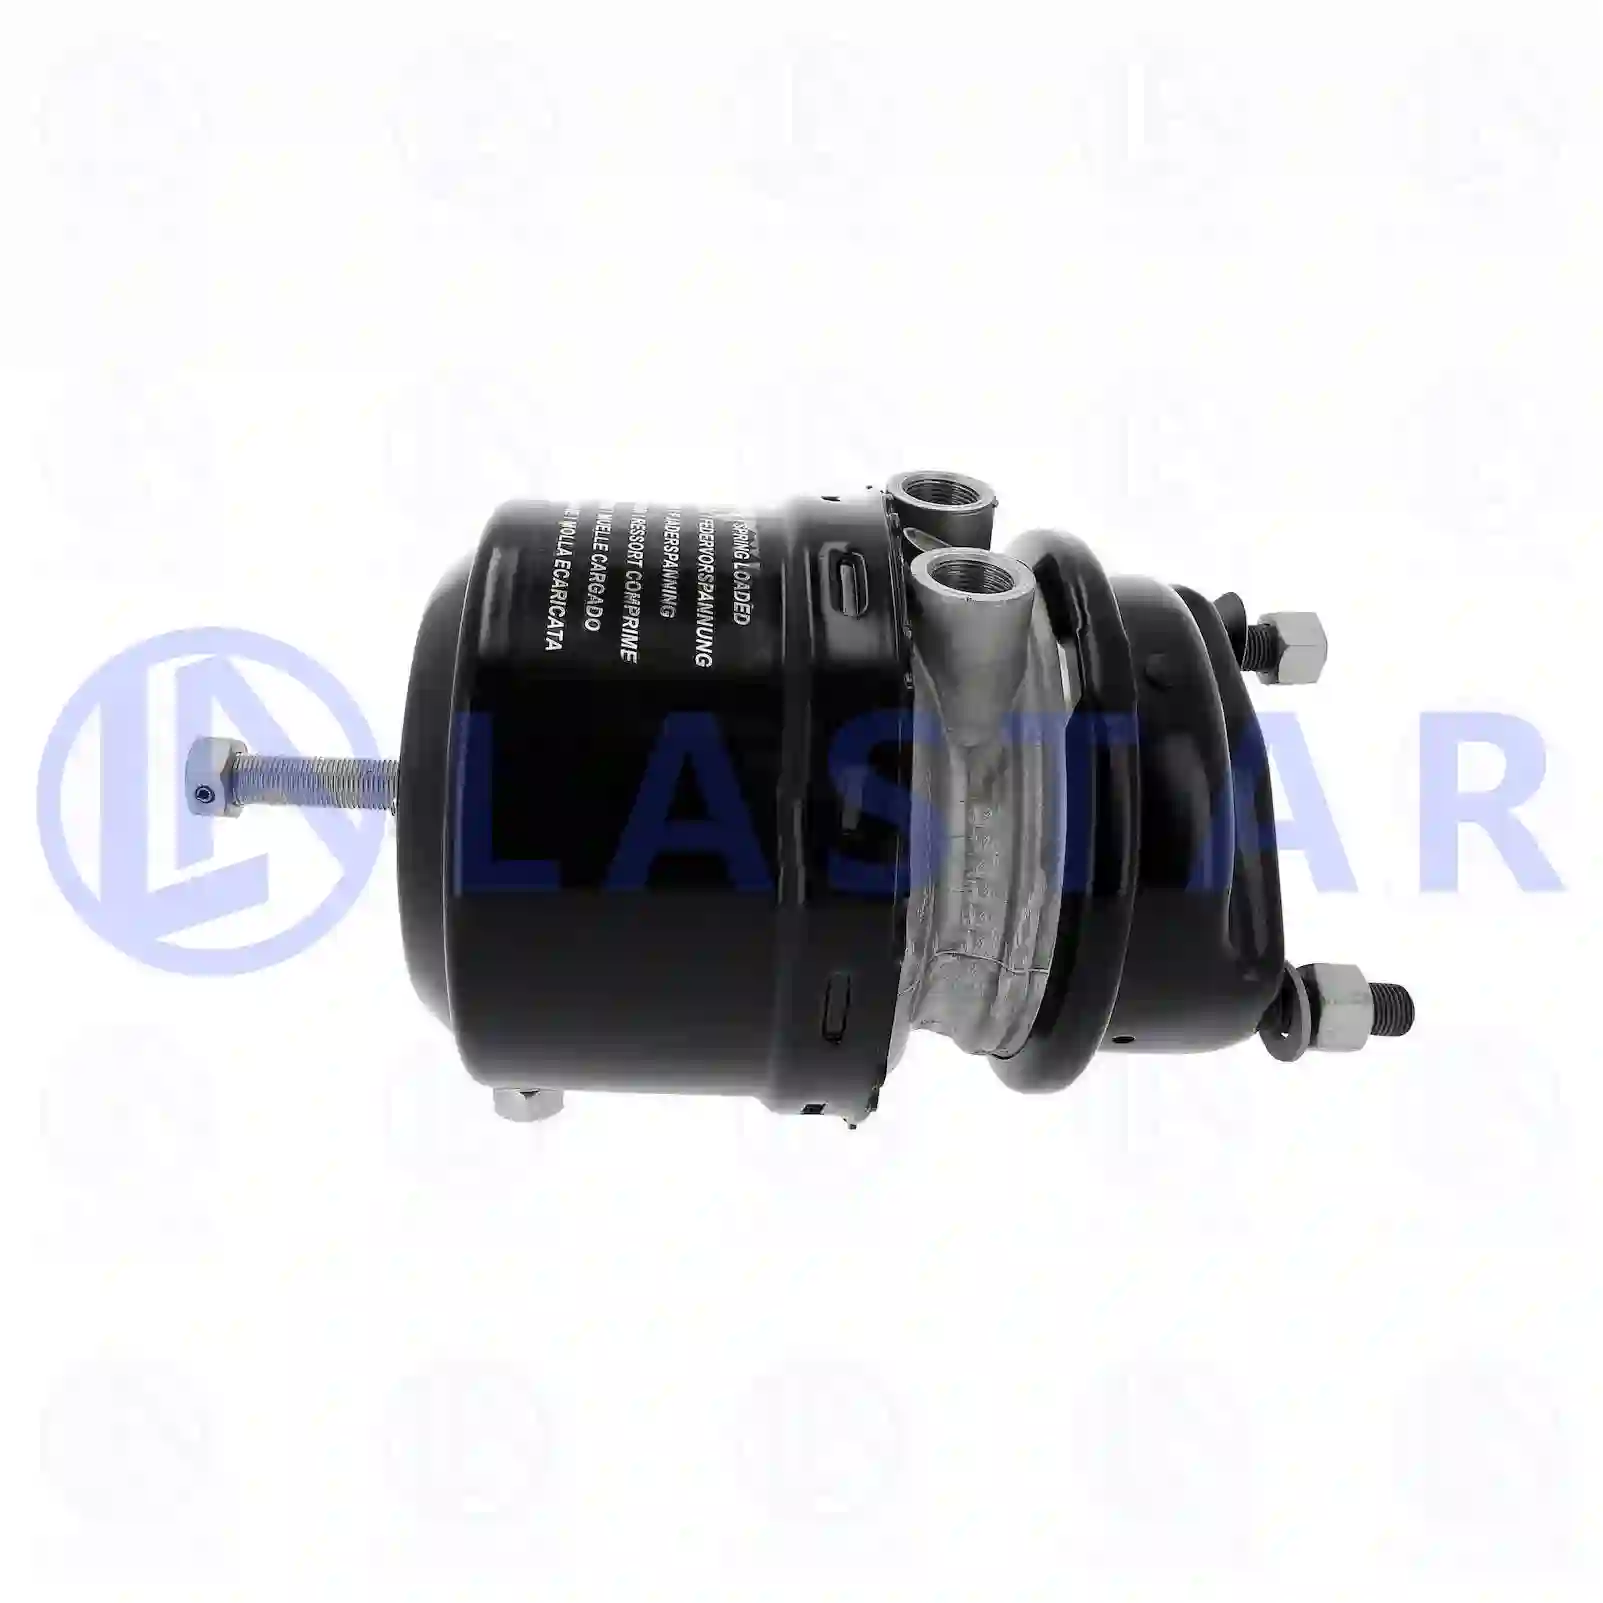 Spring brake cylinder, right, 77715399, 0154205718, 015420571805, , , ||  77715399 Lastar Spare Part | Truck Spare Parts, Auotomotive Spare Parts Spring brake cylinder, right, 77715399, 0154205718, 015420571805, , , ||  77715399 Lastar Spare Part | Truck Spare Parts, Auotomotive Spare Parts